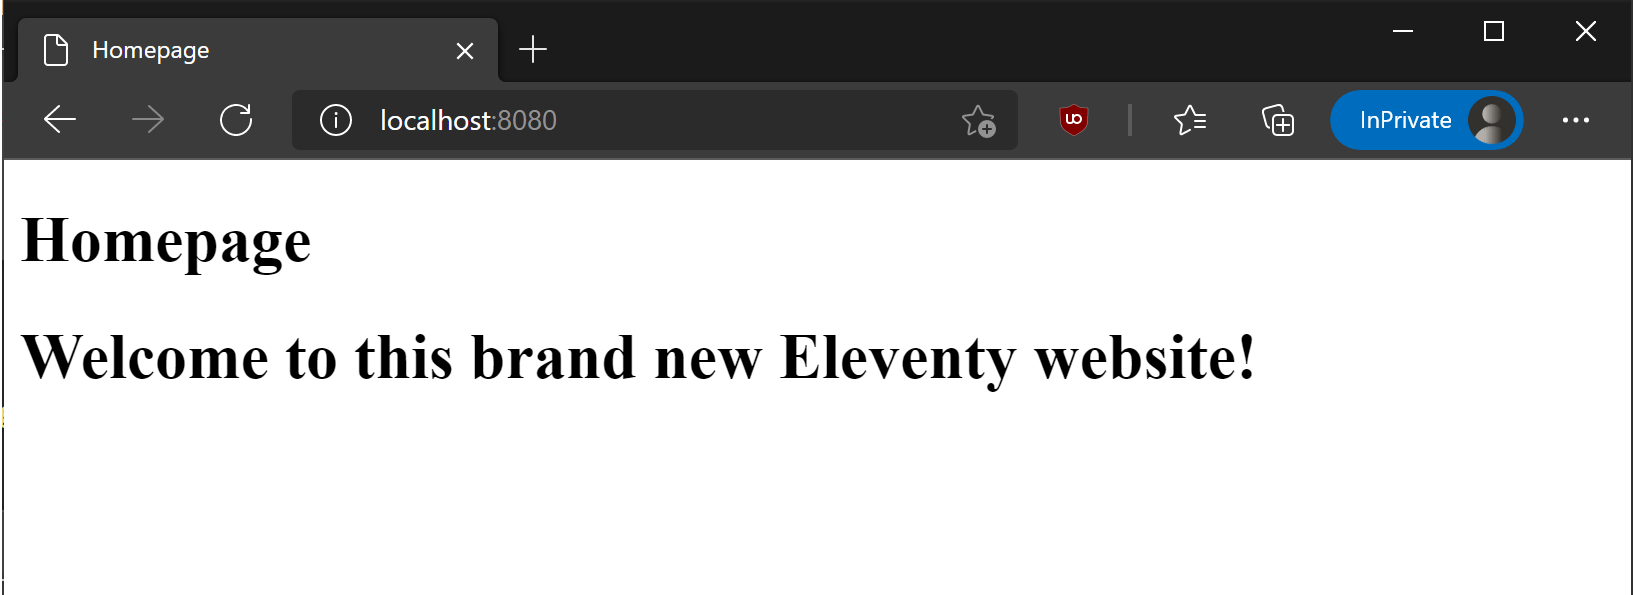 Eleventy homepage in action